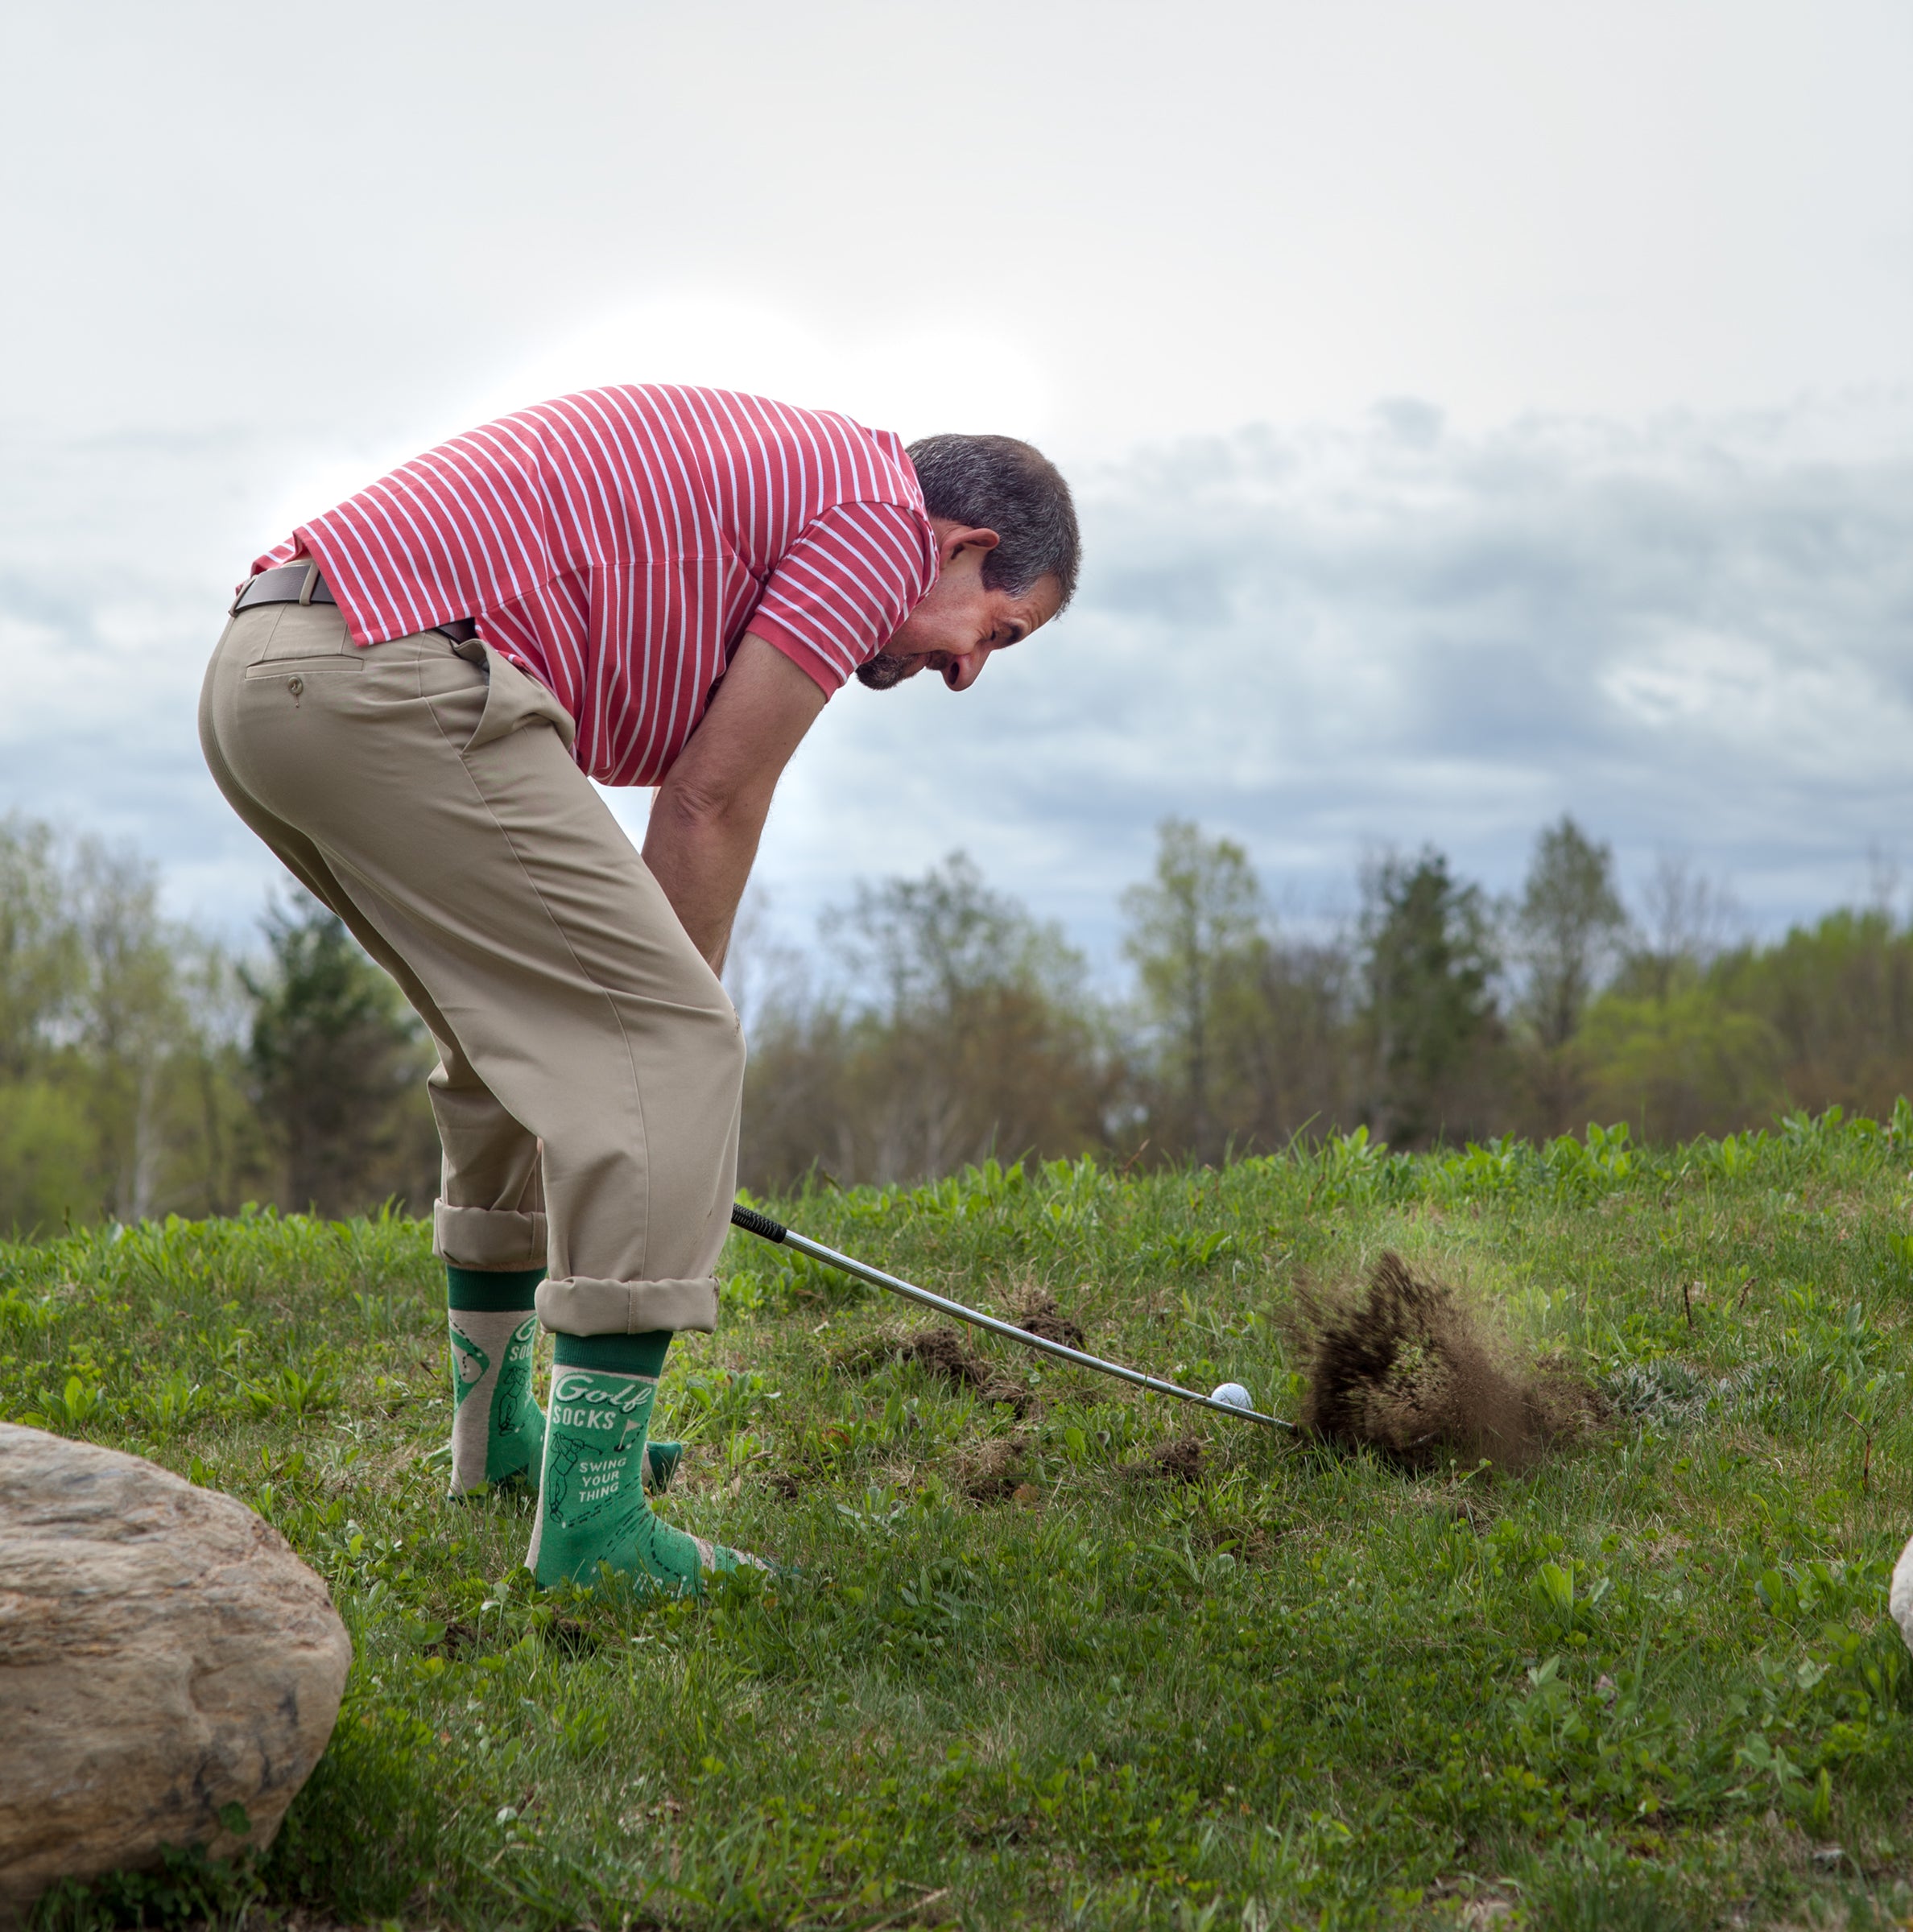 Photo of a man crouched down to make a difficult golf shot. He is wearing the advertised Blue Q golf socks.